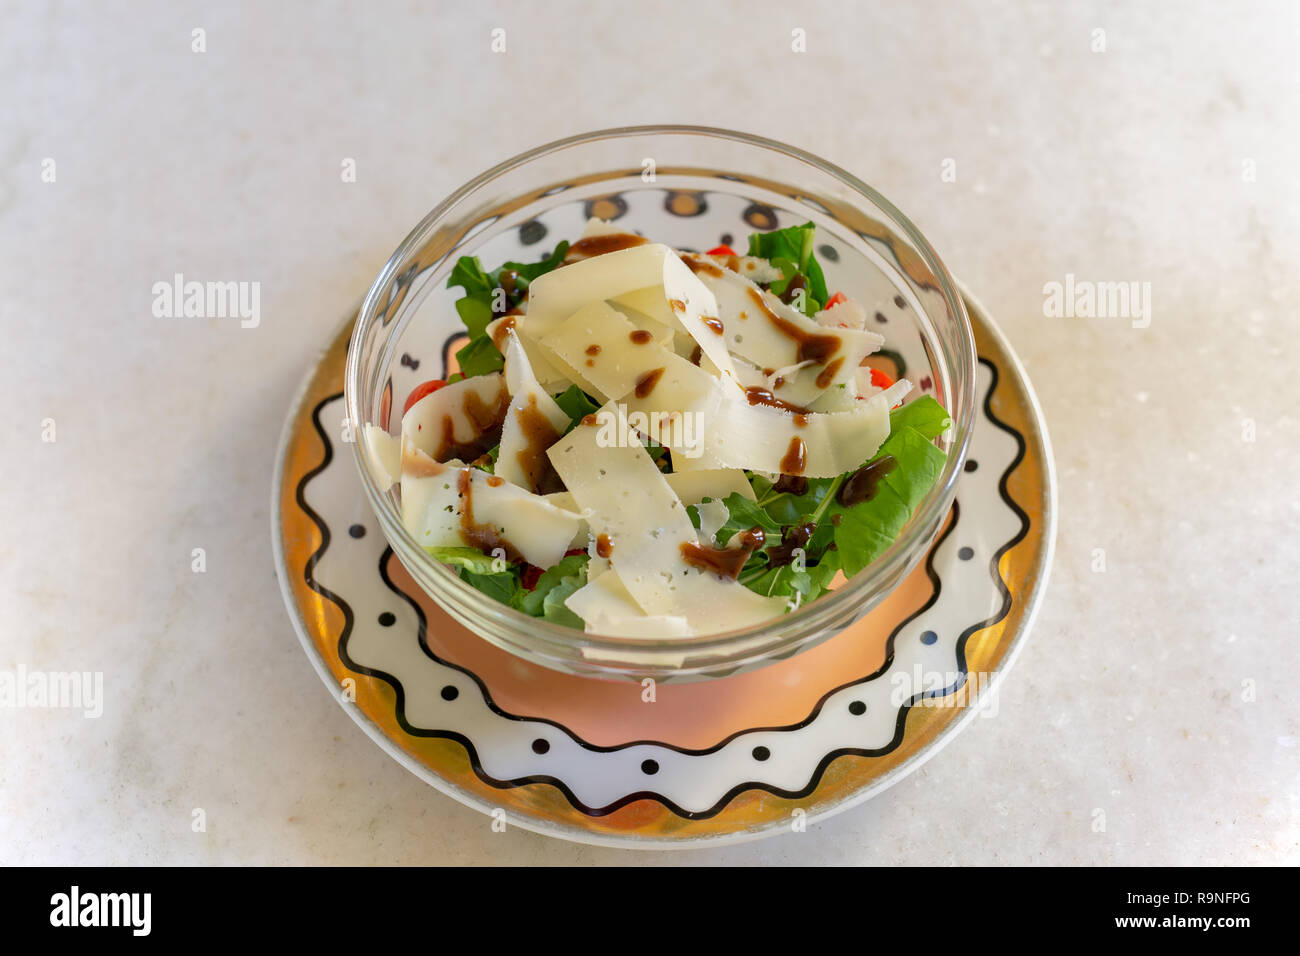 Green vegetable salad with slice of parmesan cheese in glass bowl. Stock Photo